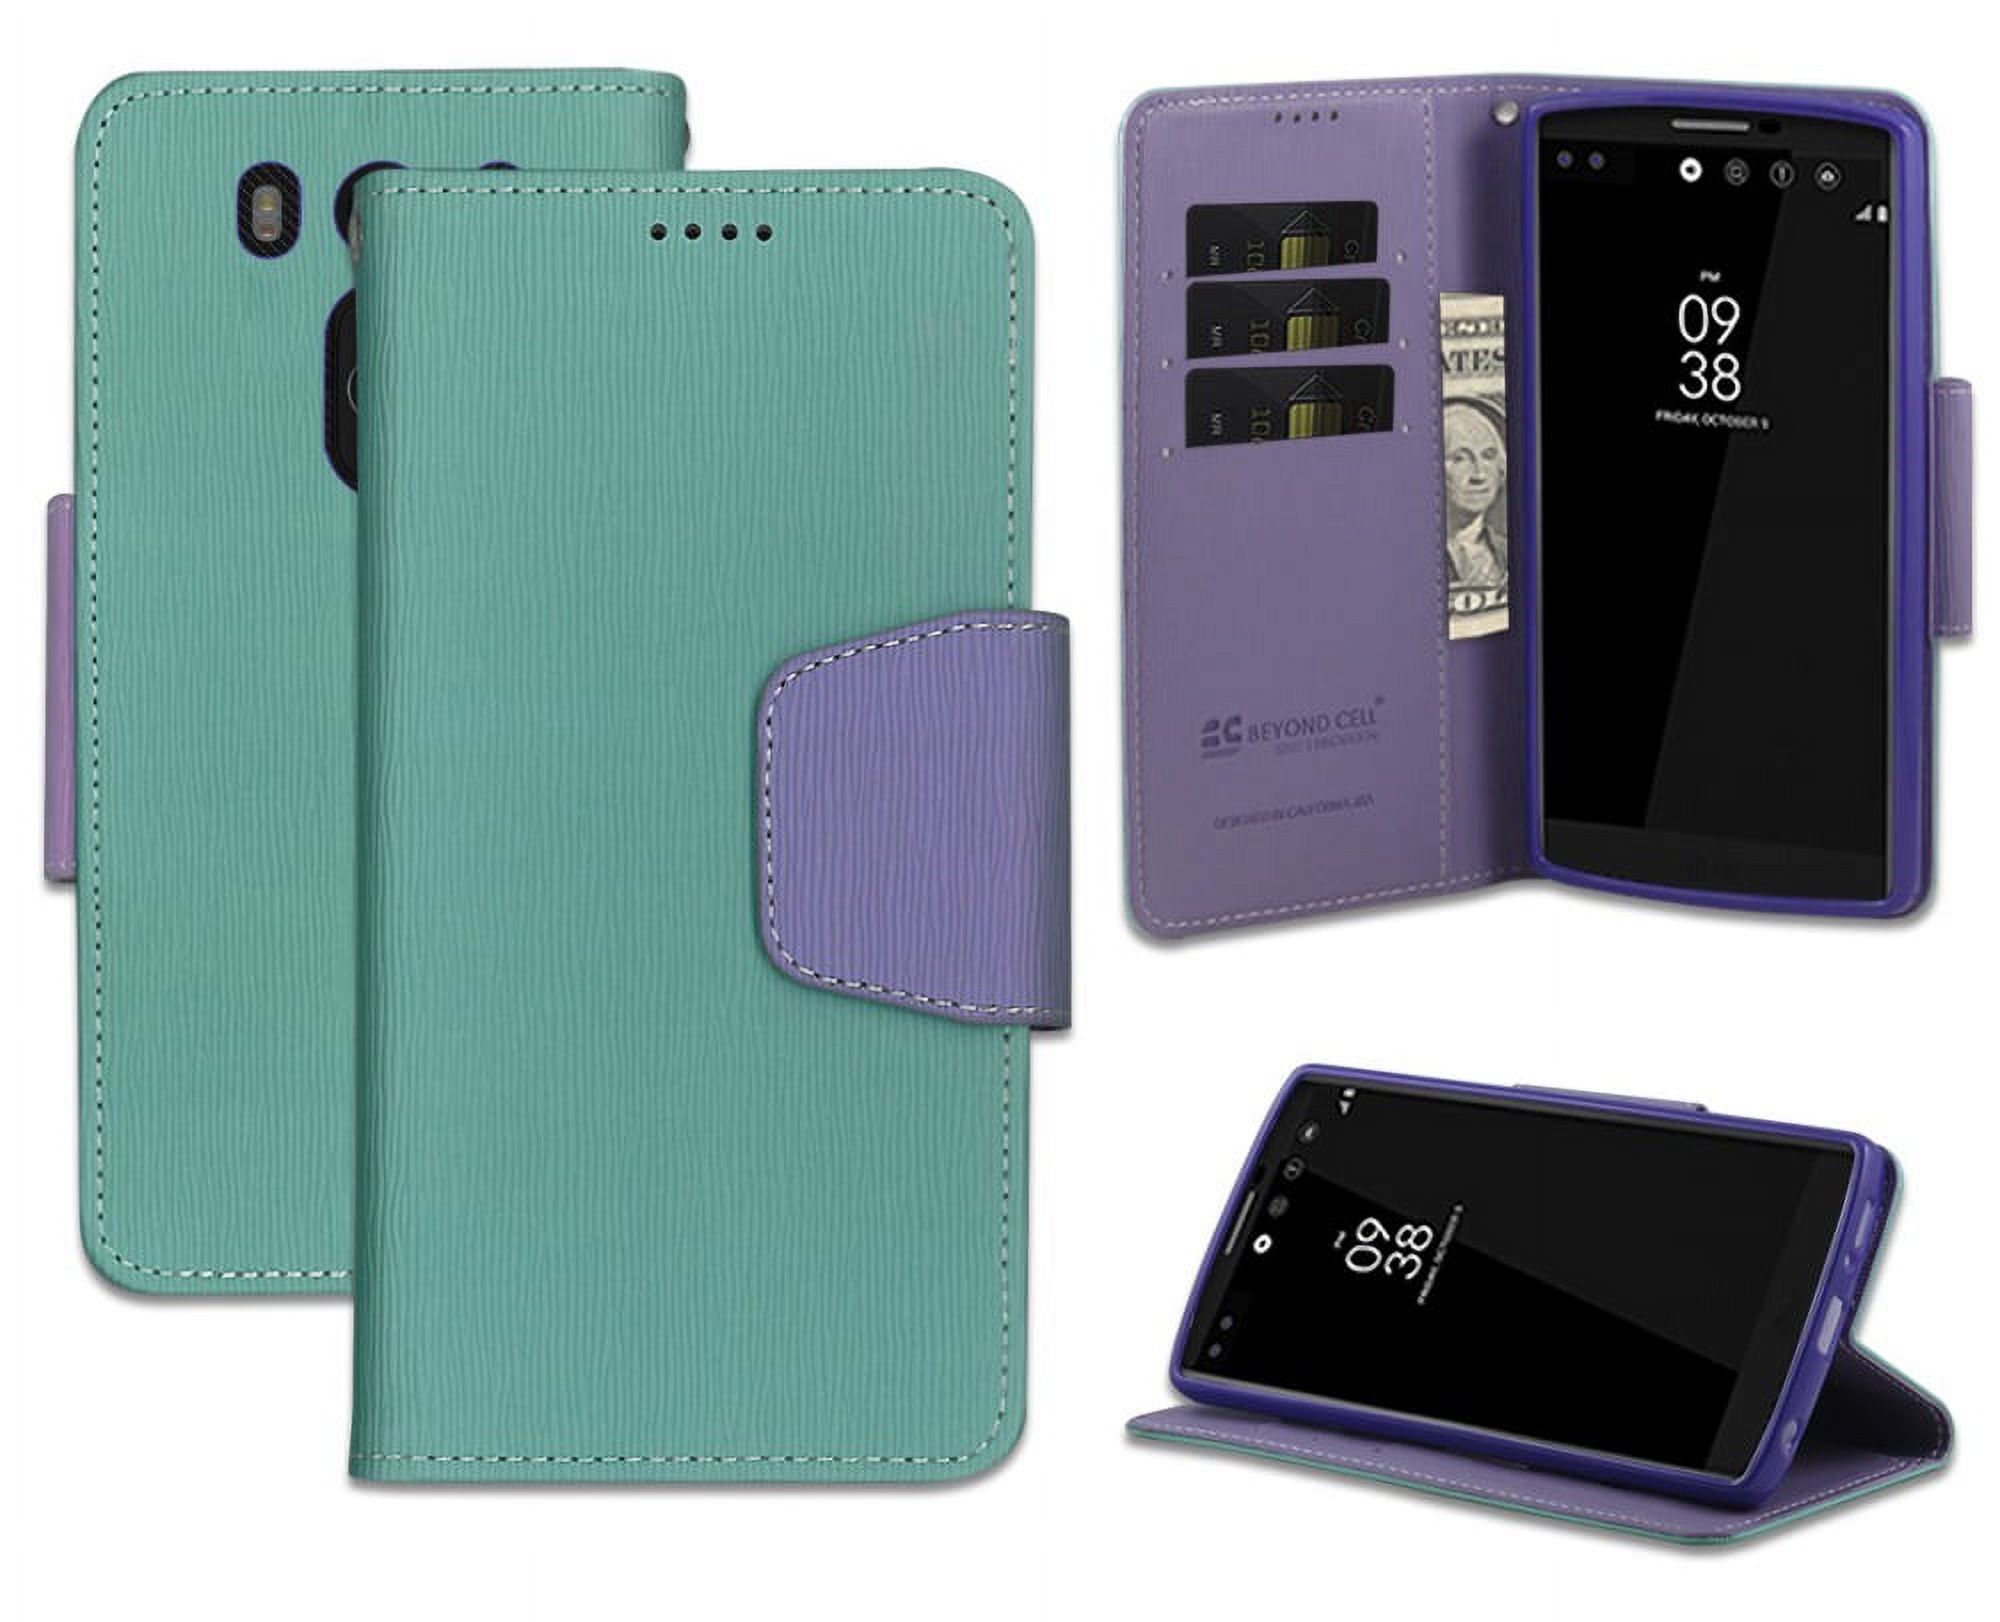 NEW BEYOND CELL MINT/PURPLE INFOLIO WALLET ID CREDIT CARD CASH CASE COVER STAND FOR LG V10 PHONE (H961N, H900, H901, VS990, F600, H961) (Verizon AT&T T-Mobile Unlocked) - image 1 of 5